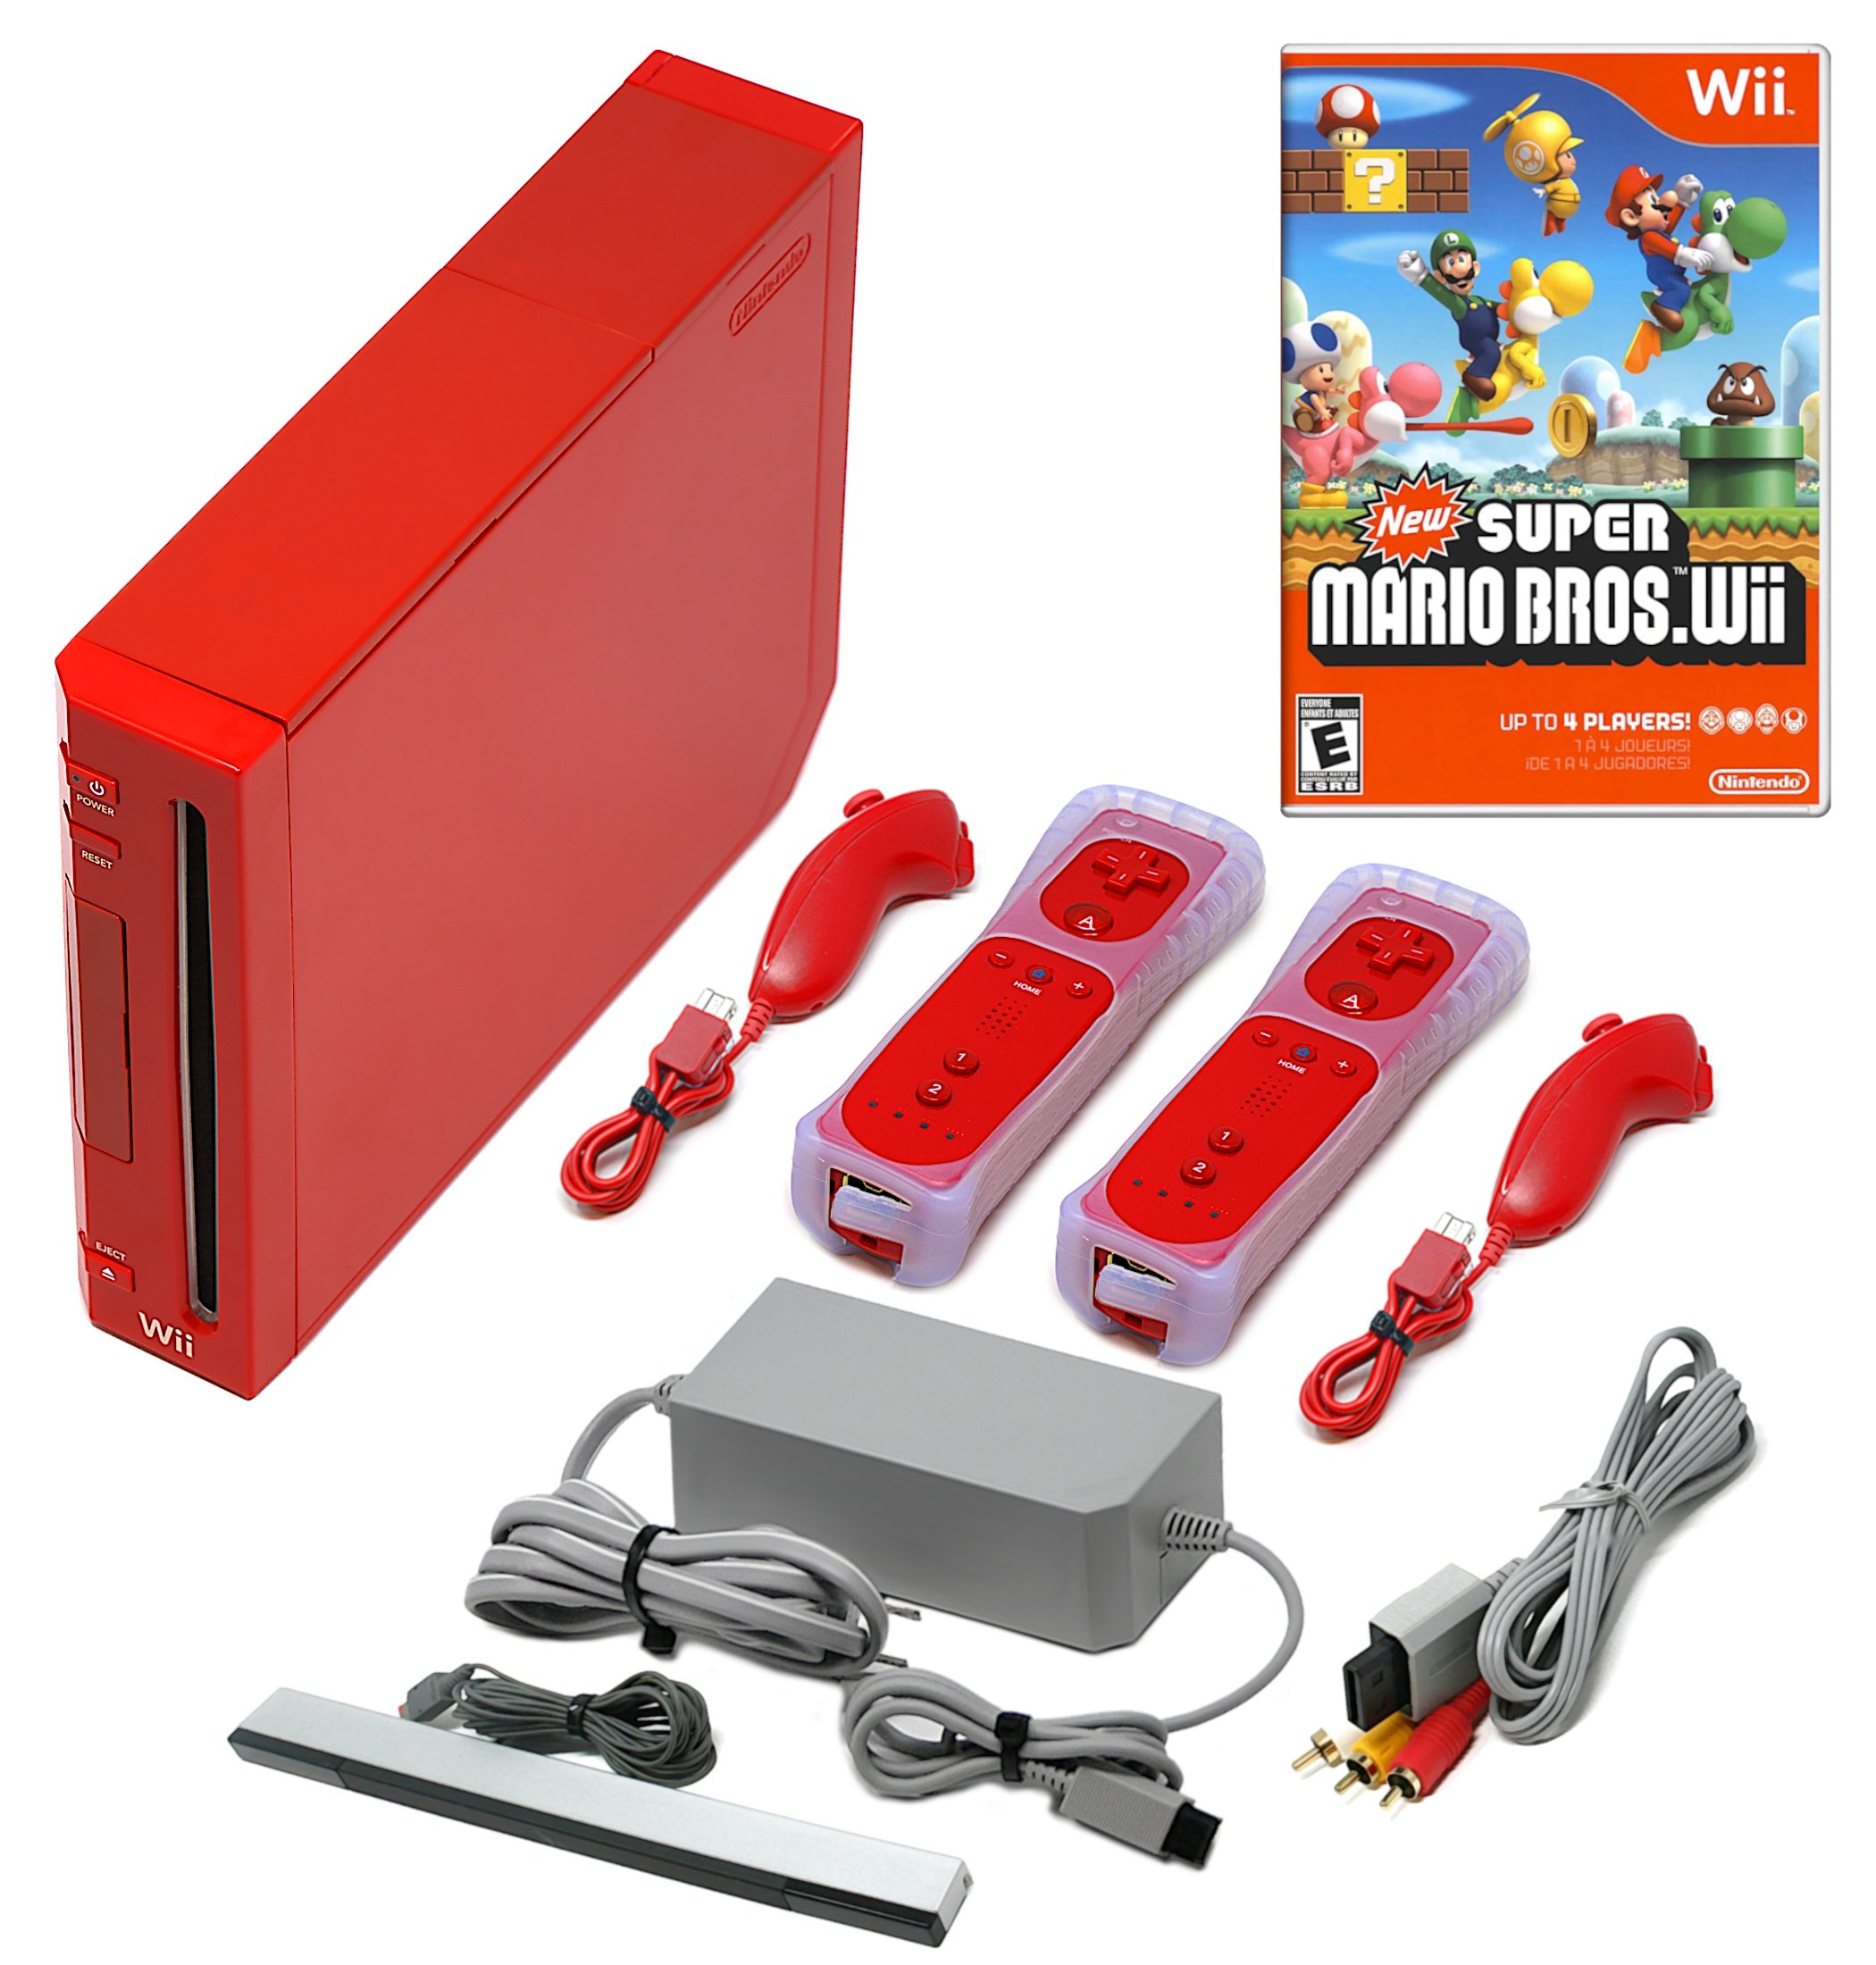 Nintendo Wii Game Console + Pick 1-4 Remotes, Wii Sports, Mario Kart & More